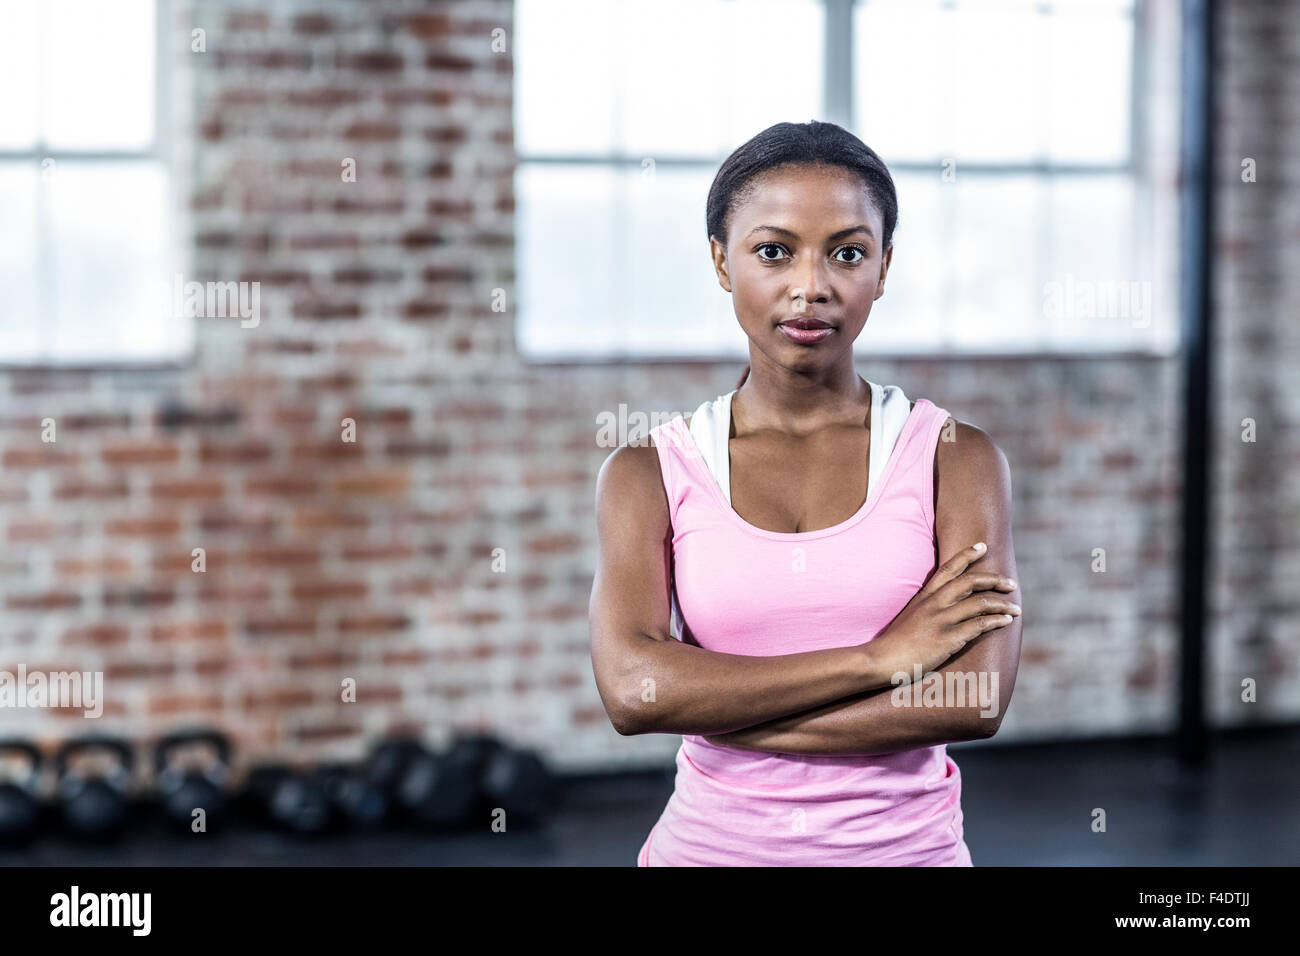 Portrait of serious muscular woman looking at camera Stock Photo